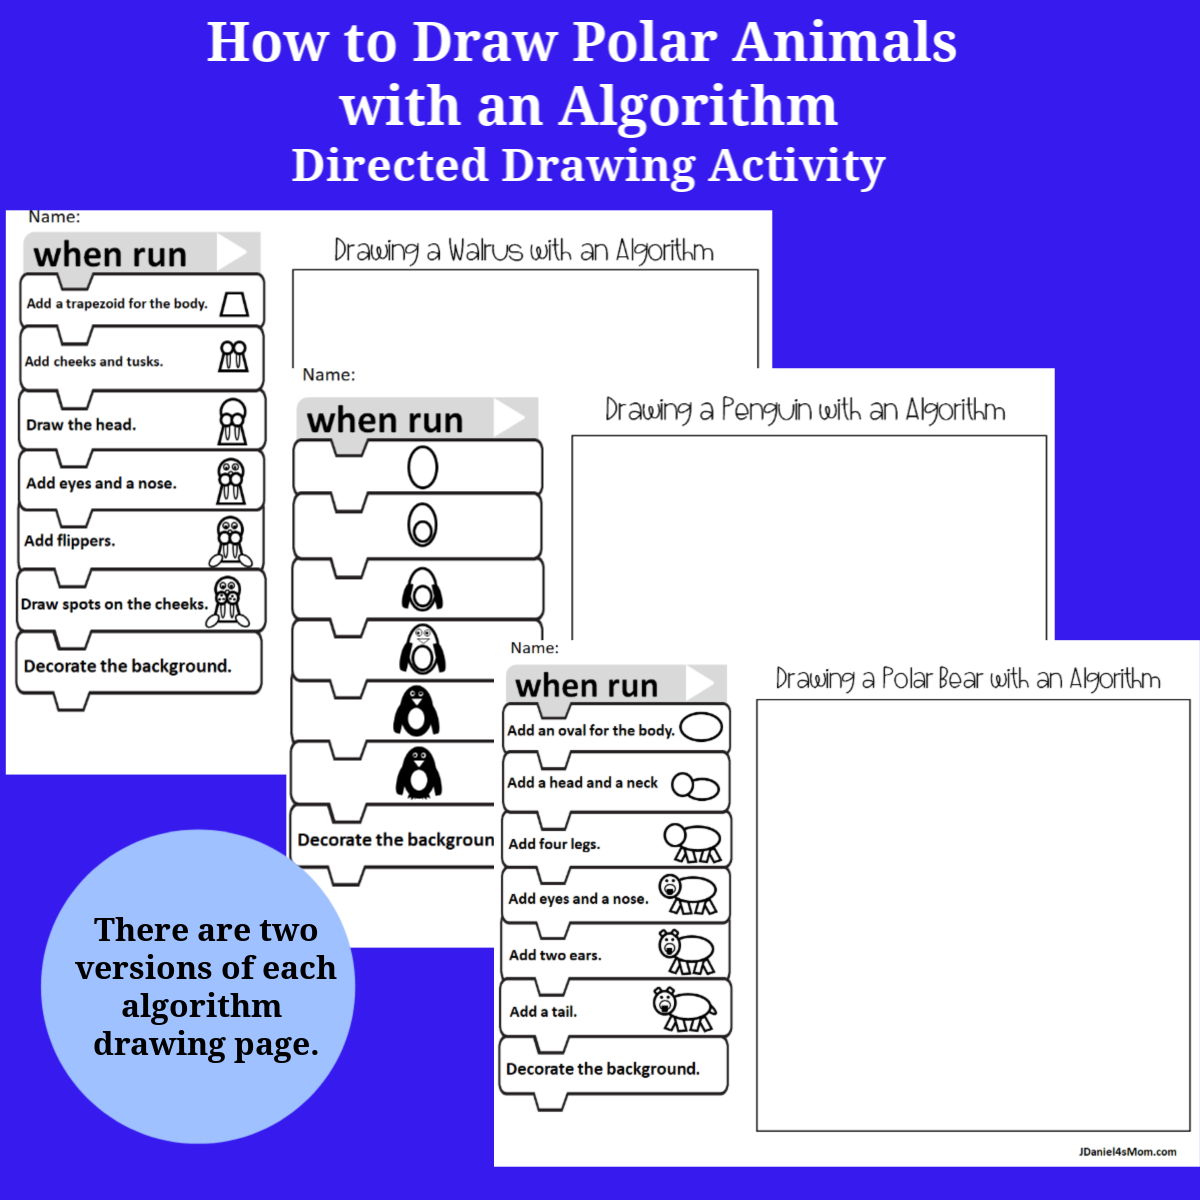 How to Draw Polar Animals Directed Drawing Activity